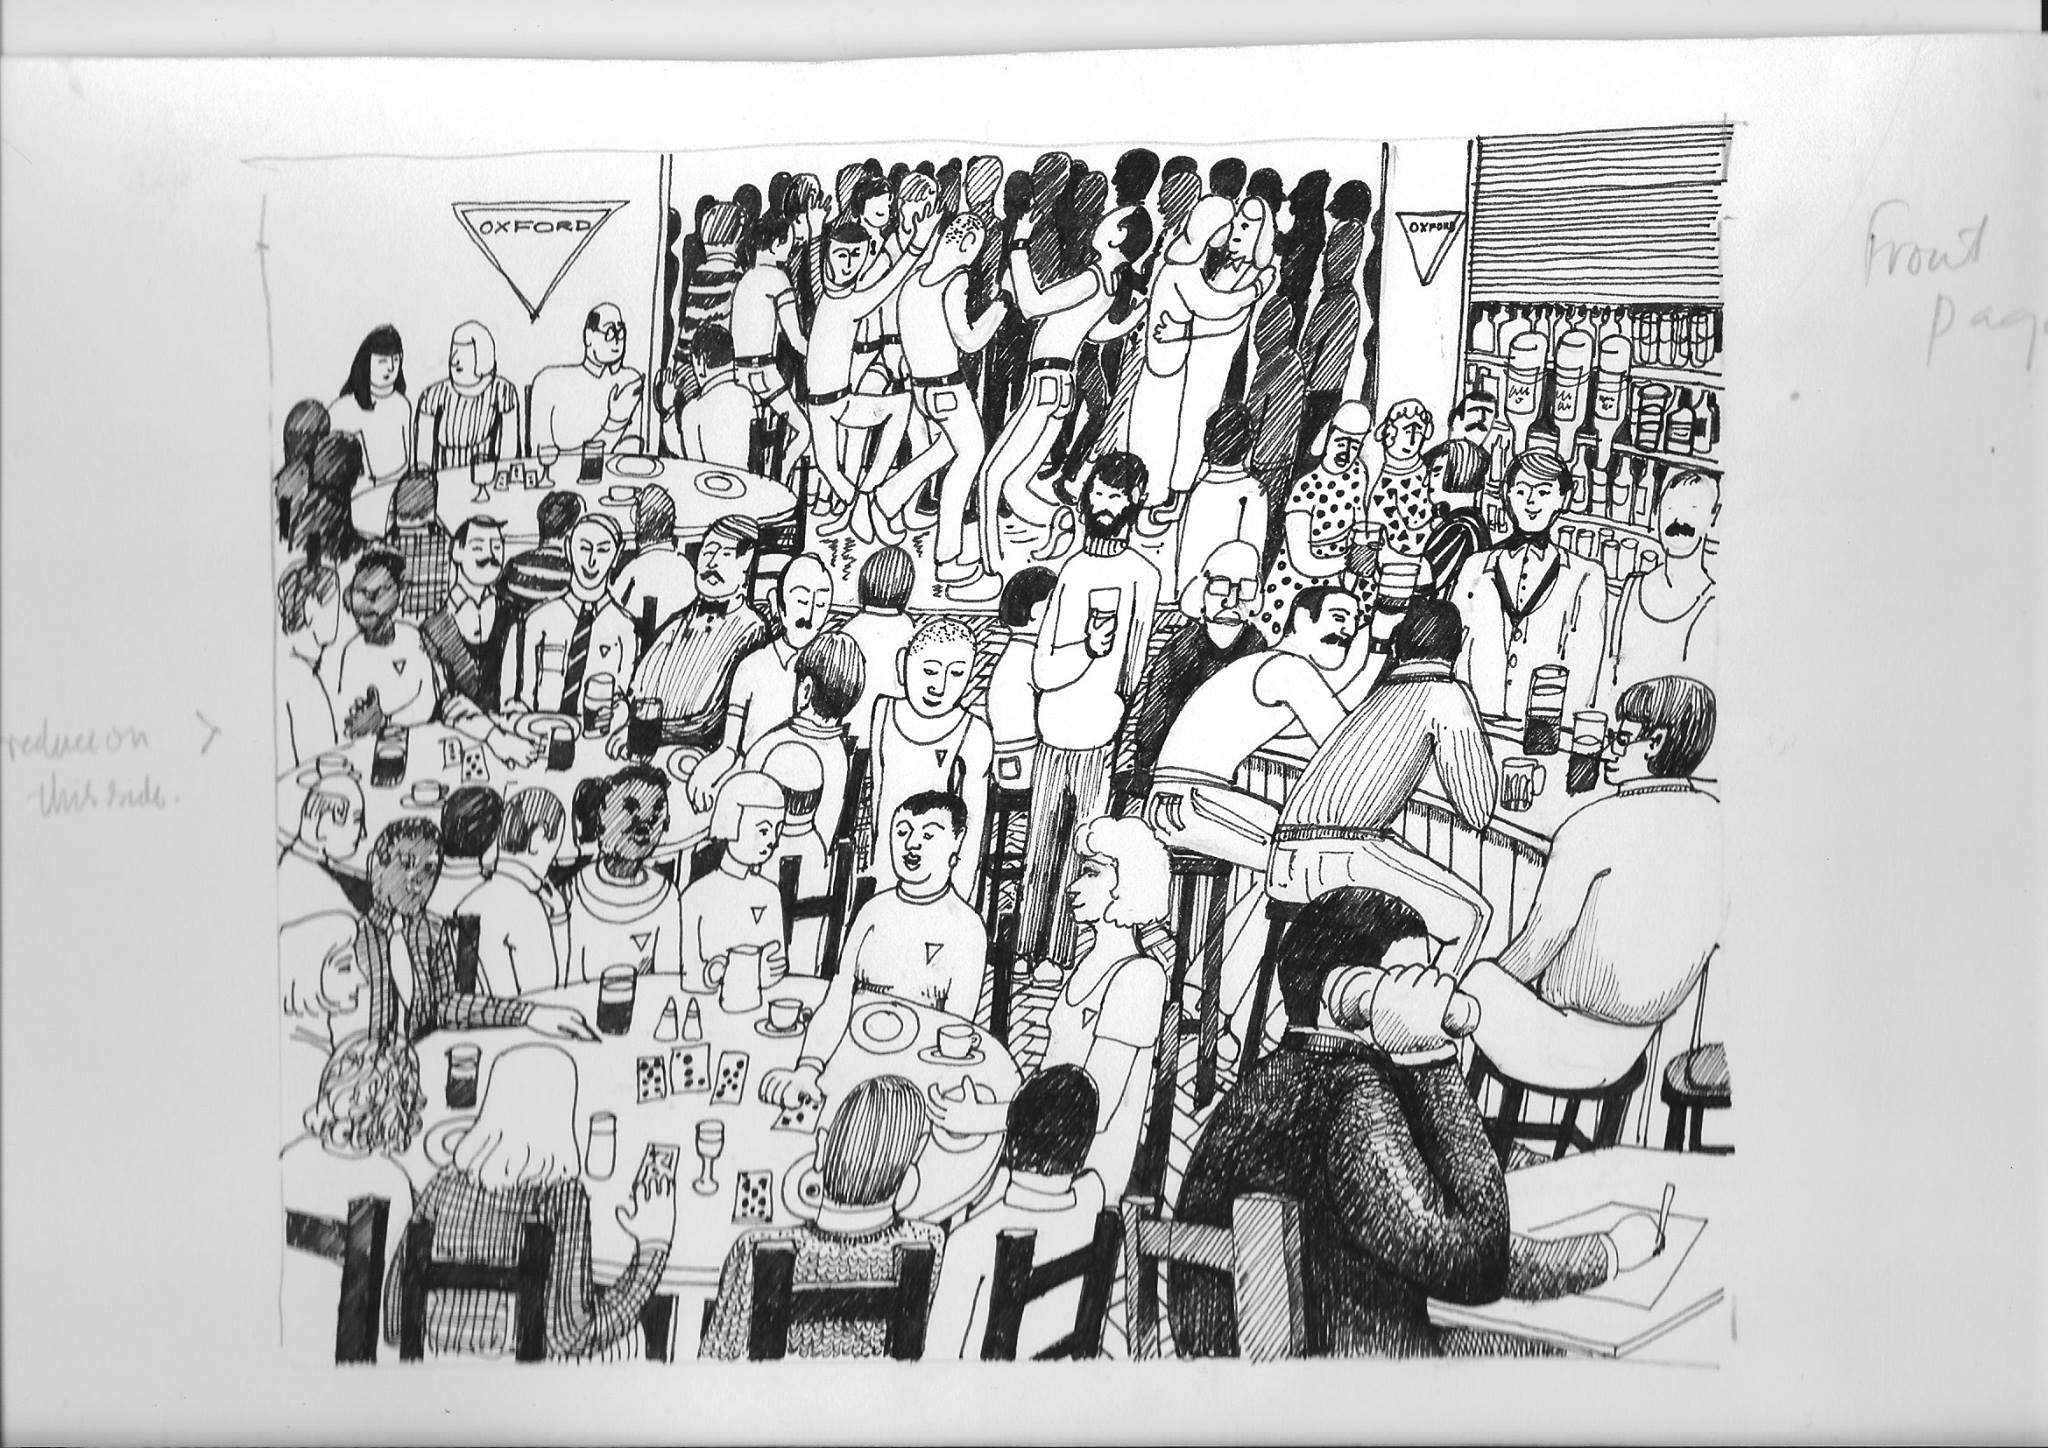 Archival black & white drawing showing a gathering of people at the Lesbian & Gay Community Centre (no longer in existence)